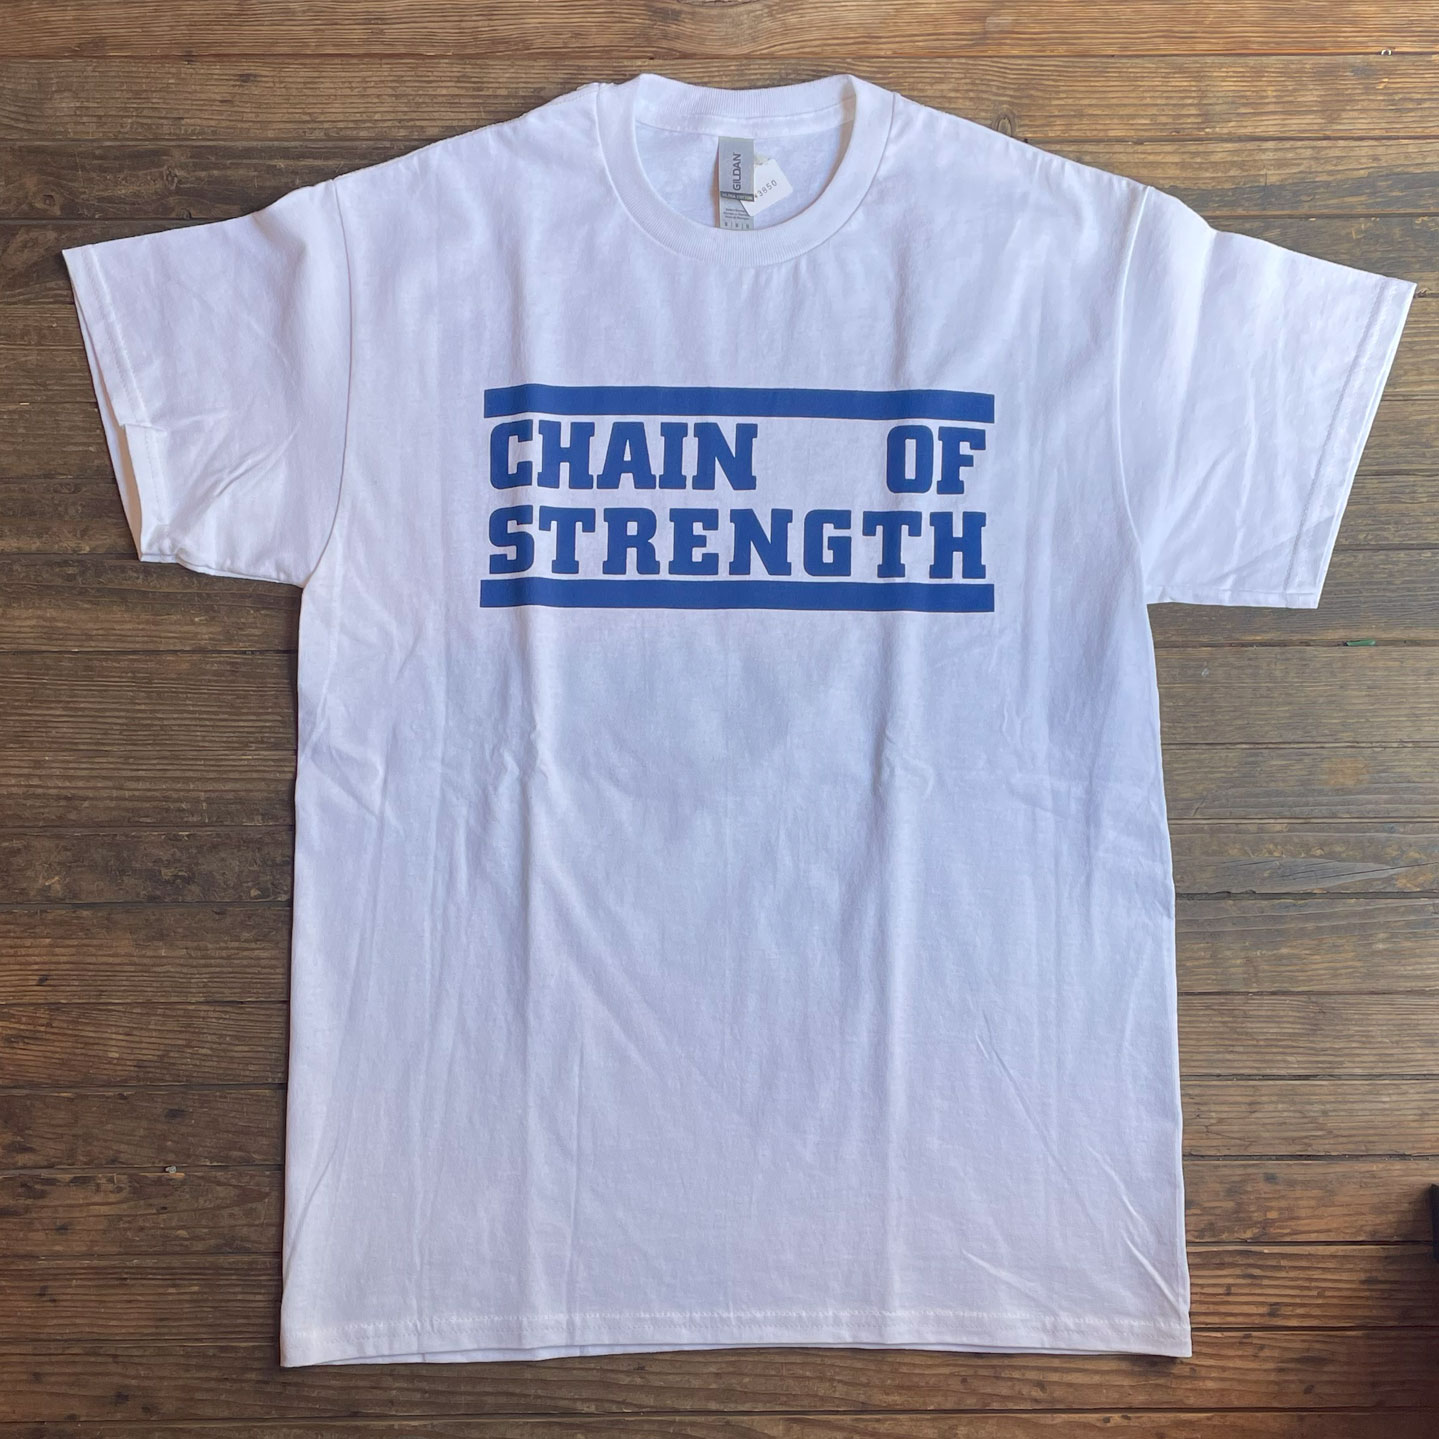 CHAIN OF STRENGTH Tシャツ Has the edge gone dull? | 45REVOLUTION